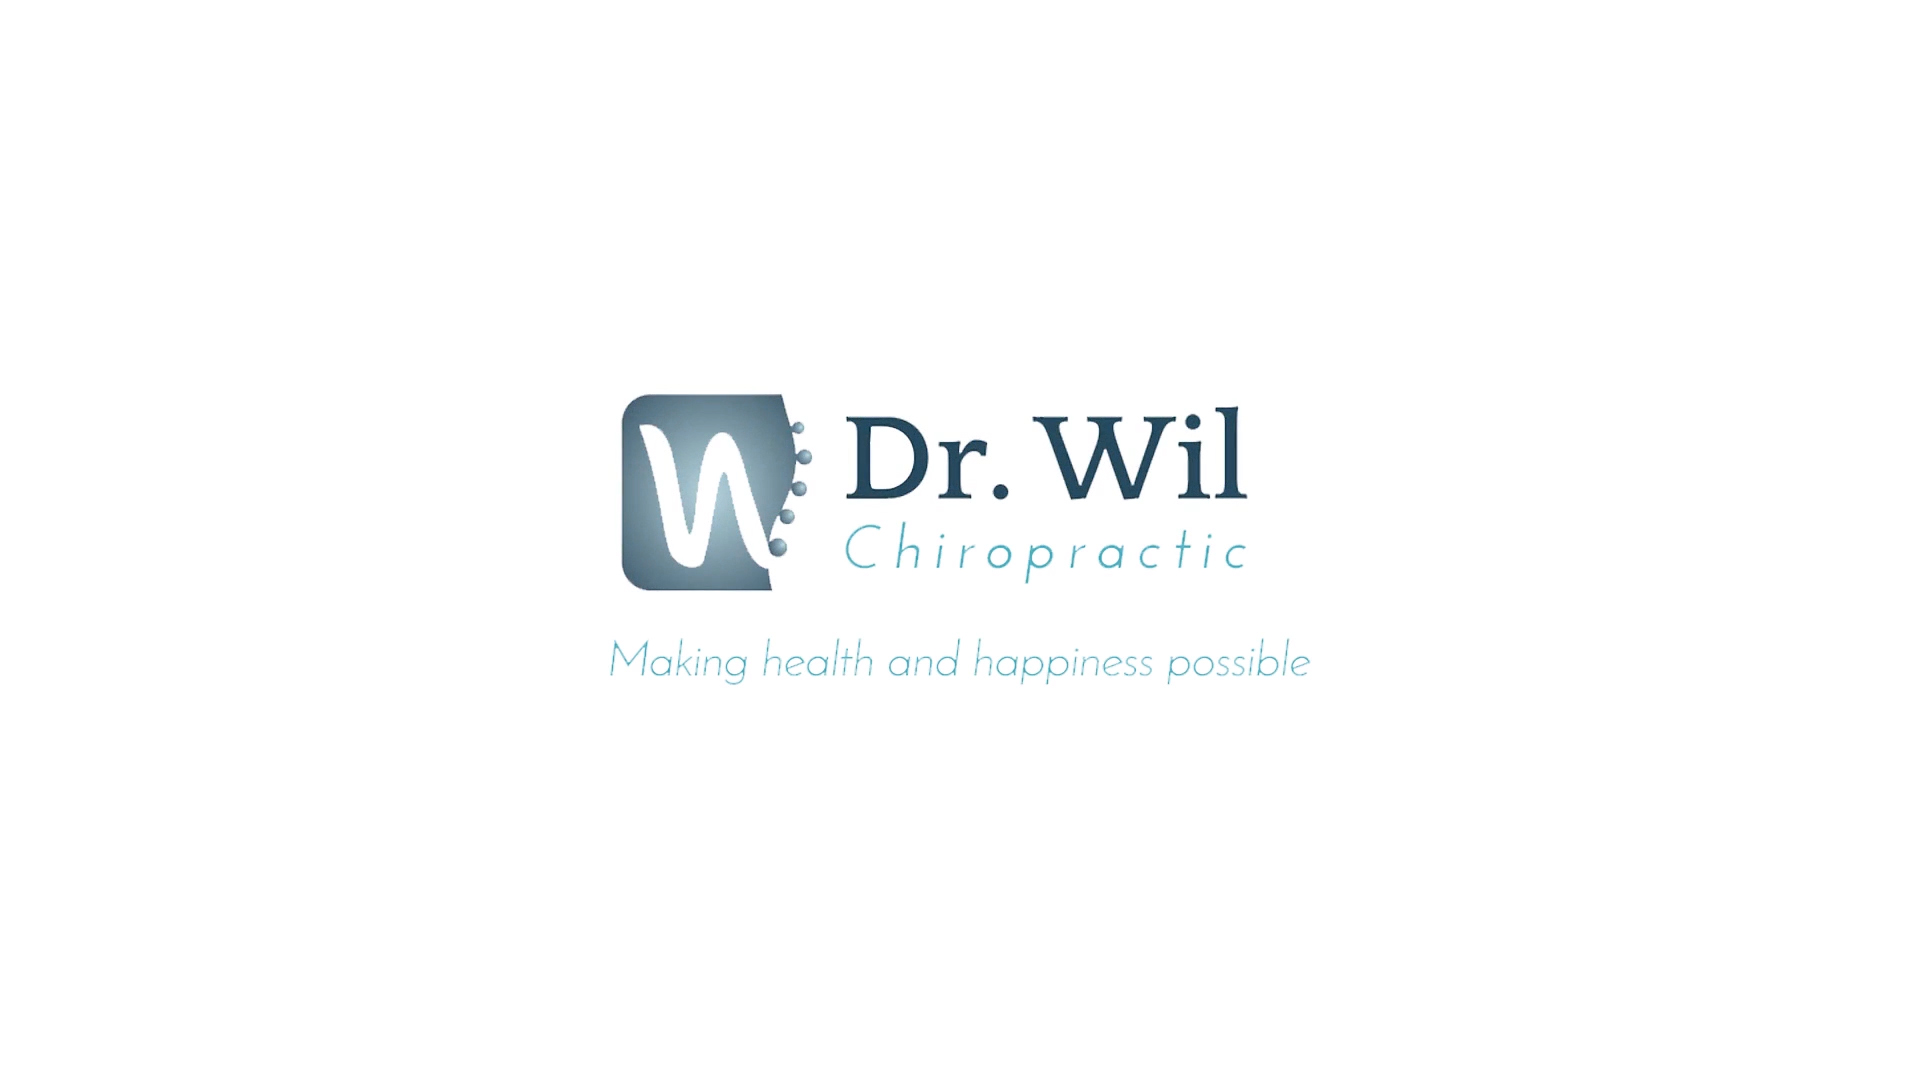 Dr. Wil Chiropractic